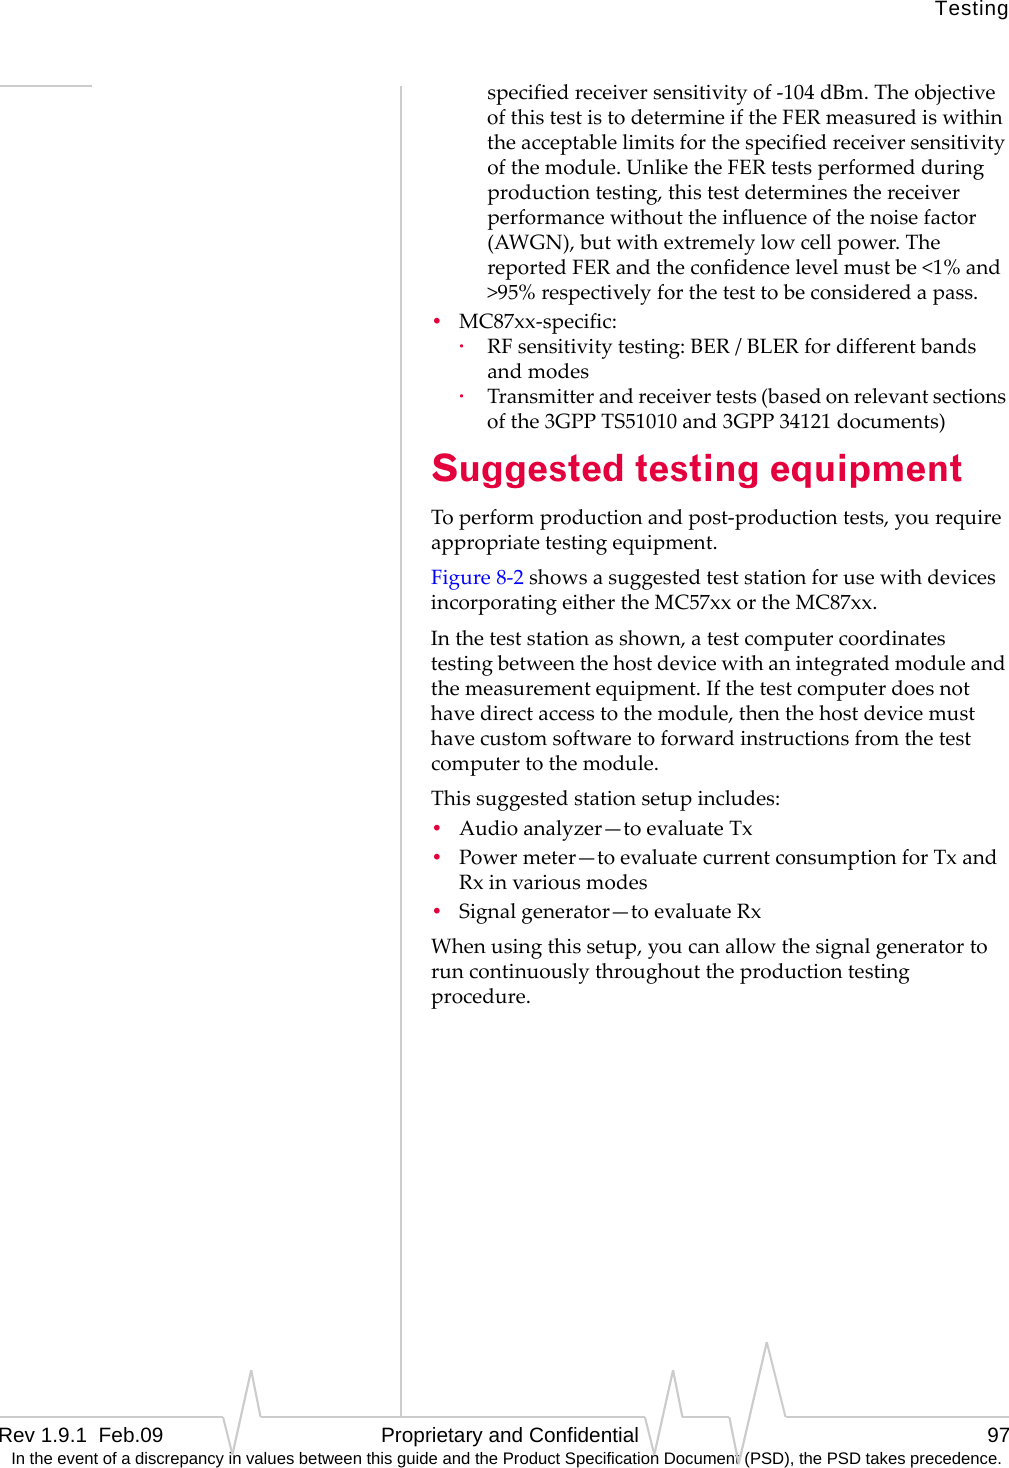 TestingRev 1.9.1  Feb.09   Proprietary and Confidential 97 In the event of a discrepancy in values between this guide and the Product Specification Document (PSD), the PSD takes precedence.specifiedreceiversensitivityof‐104dBm.TheobjectiveofthistestistodetermineiftheFERmeasurediswithintheacceptablelimitsforthespecifiedreceiversensitivityofthemodule.UnliketheFERtestsperformedduringproductiontesting,thistestdeterminesthereceiverperformancewithouttheinfluenceofthenoisefactor(AWGN),butwithextremelylowcellpower.ThereportedFERandtheconfidencelevelmustbe&lt;1%and&gt;95%respectivelyforthetesttobeconsideredapass.•MC87xx‐specific:·RFsensitivitytesting:BER/BLERfordifferentbandsandmodes·Transmitterandreceivertests(basedonrelevantsectionsofthe3GPPTS51010and3GPP34121documents)Suggested testing equipmentToperformproductionandpost‐productiontests,yourequireappropriatetestingequipment.Figure8‐2showsasuggestedteststationforusewithdevicesincorporatingeithertheMC57xxortheMC87xx.Intheteststationasshown,atestcomputercoordinatestestingbetweenthehostdevicewithanintegratedmoduleandthemeasurementequipment.Ifthetestcomputerdoesnothavedirectaccesstothemodule,thenthehostdevicemusthavecustomsoftwaretoforwardinstructionsfromthetestcomputertothemodule.Thissuggestedstationsetupincludes:•Audioanalyzer—toevaluateTx•Powermeter—toevaluatecurrentconsumptionforTxandRxinvariousmodes•Signalgenerator—toevaluateRxWhenusingthissetup,youcanallowthesignalgeneratortoruncontinuouslythroughouttheproductiontestingprocedure.